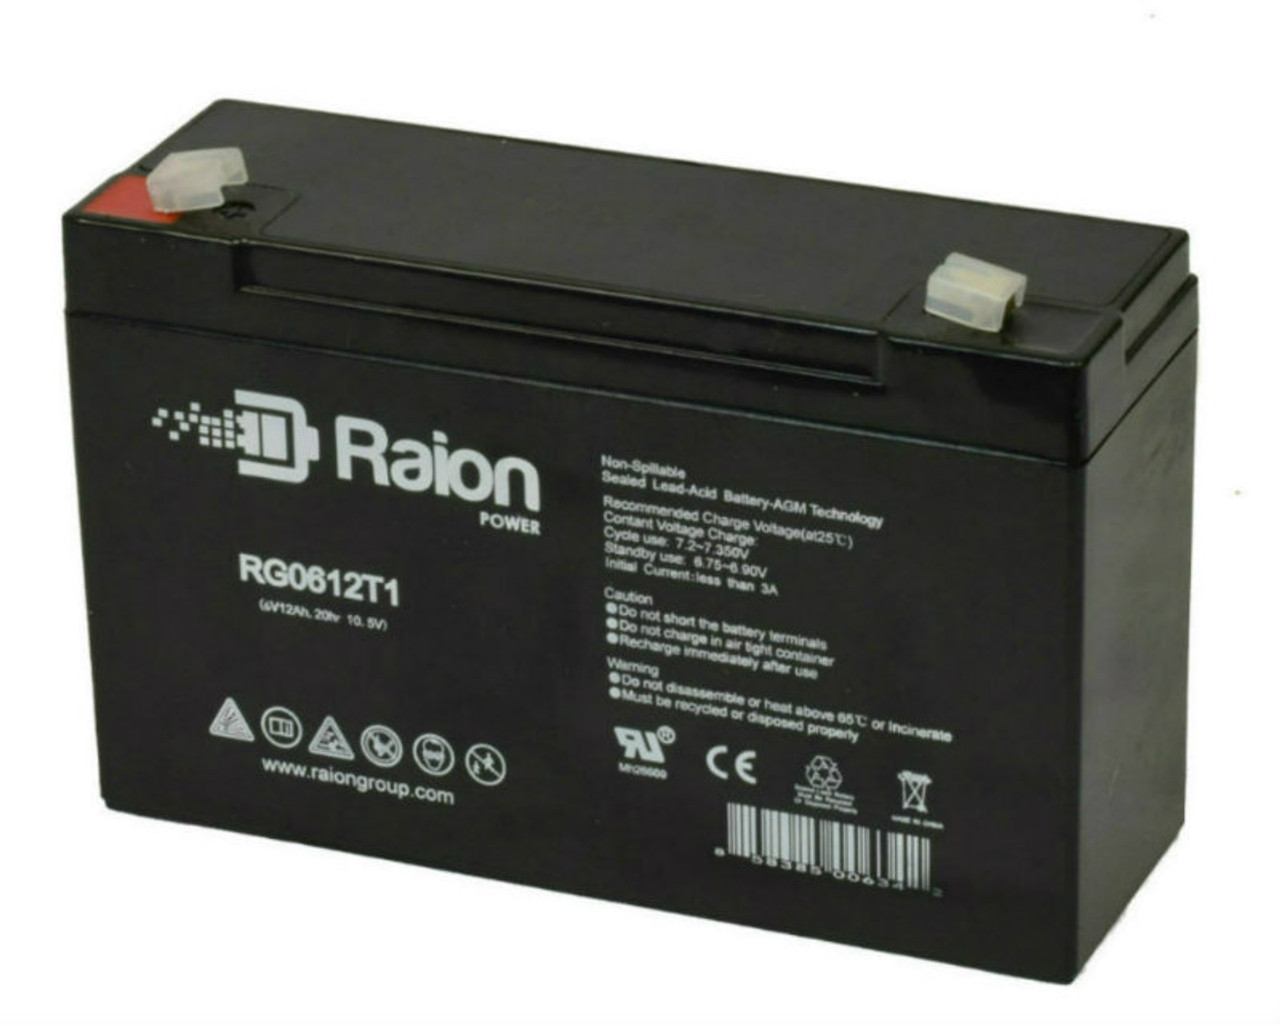 Raion Power RG06120T1 Replacement Battery for Consent Battery GS612